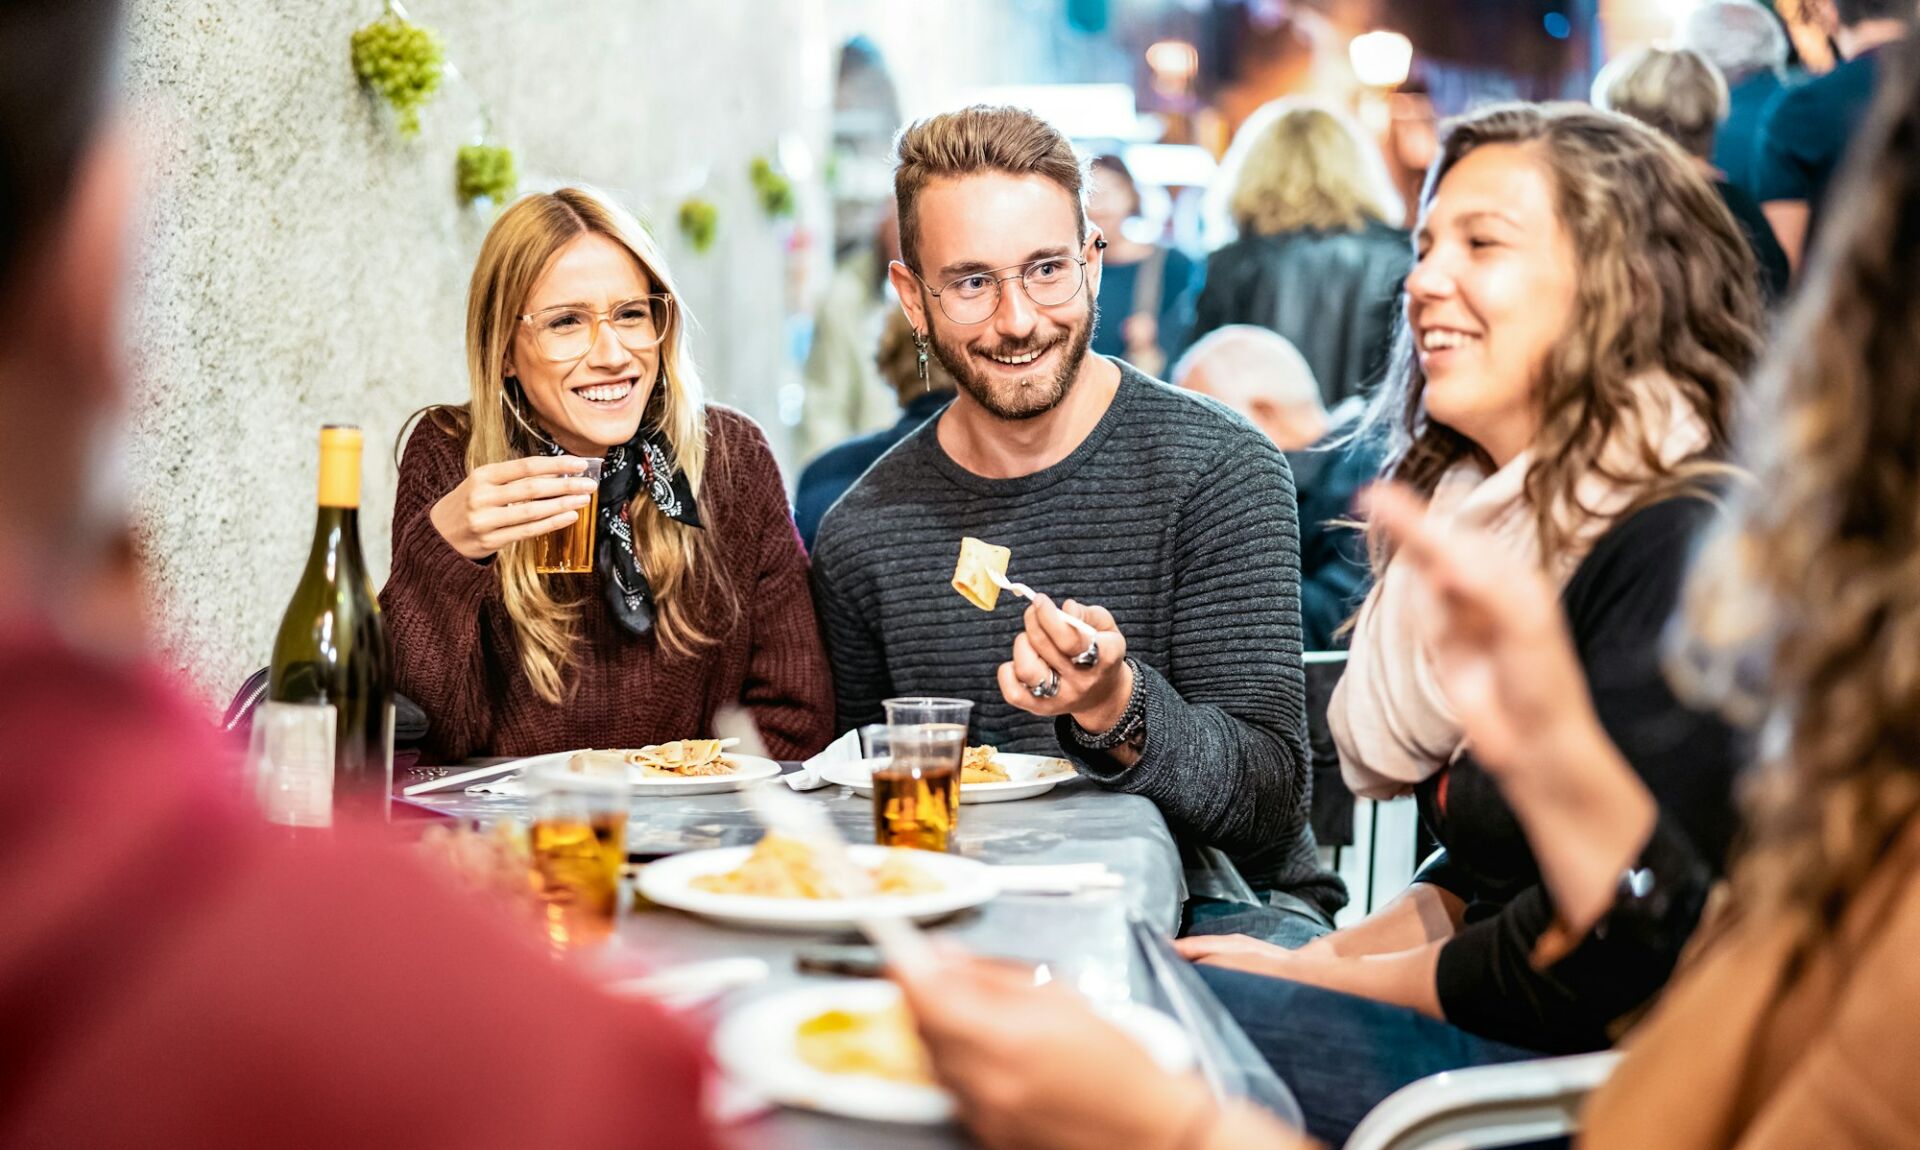 Mastering Social Events: Smart Food Choices Made Easy